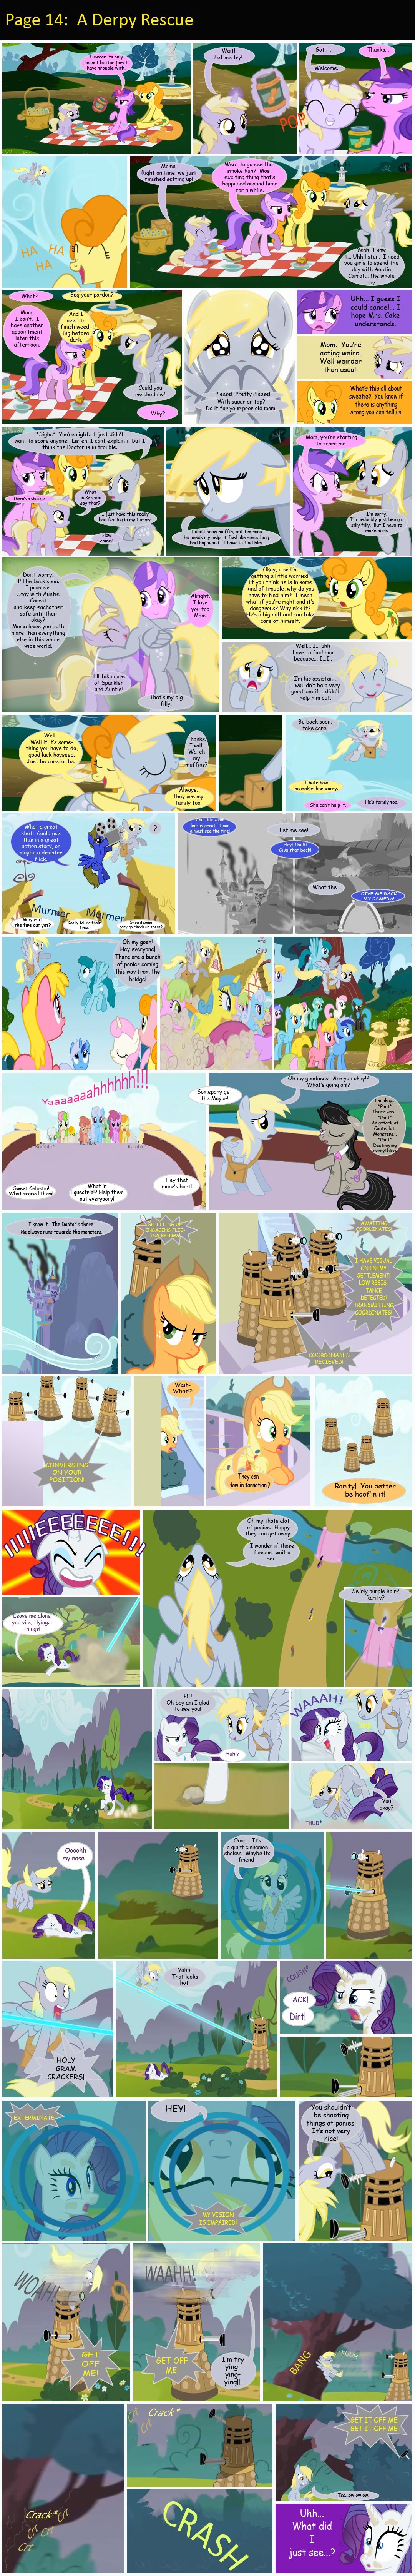 [ShwiggityShwah] Doctor Whooves: Elder (My Little Pony: Friendship is Magic) [English] [Ongoing] 13